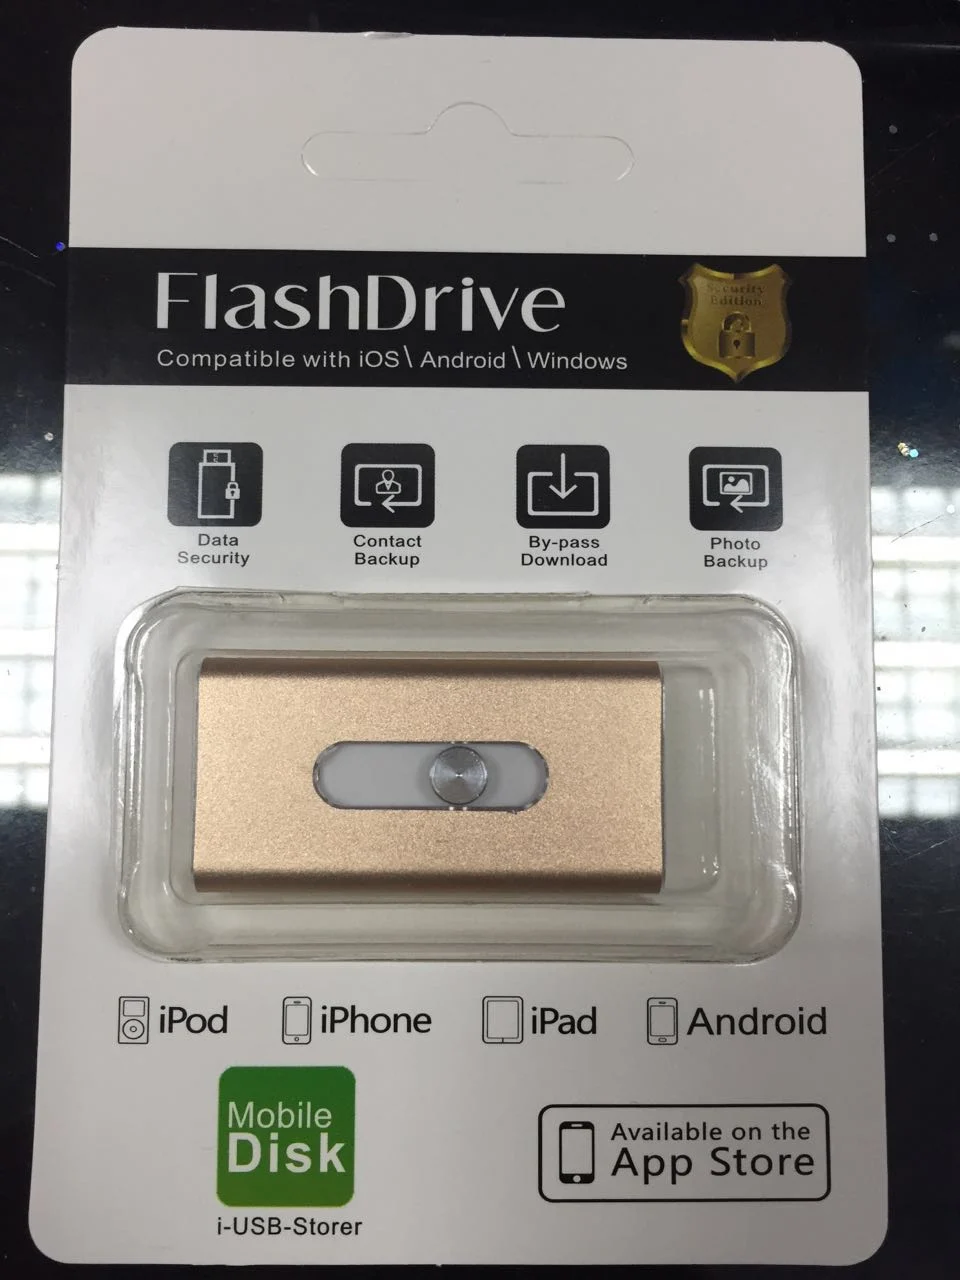 3 in 1 OTG USB Flash Drive for iPhone 64GB USB Flash Drive for iPhone and Android with Your Logo